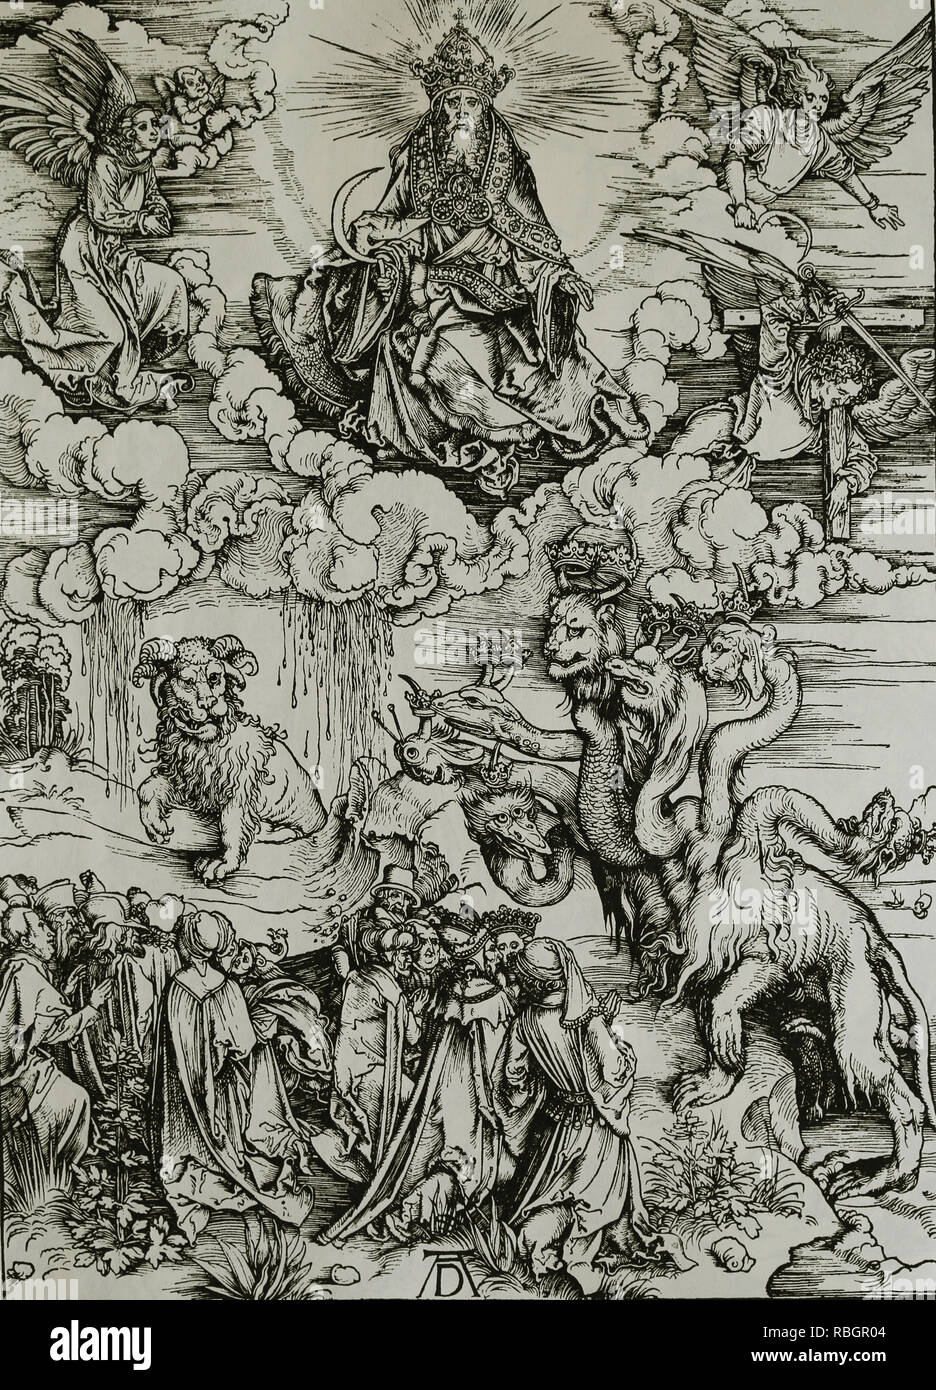 The beast with the lamb's horns and the beast with 7 heads. Apocalypse of Albrecht Durer. 1498. Stock Photo